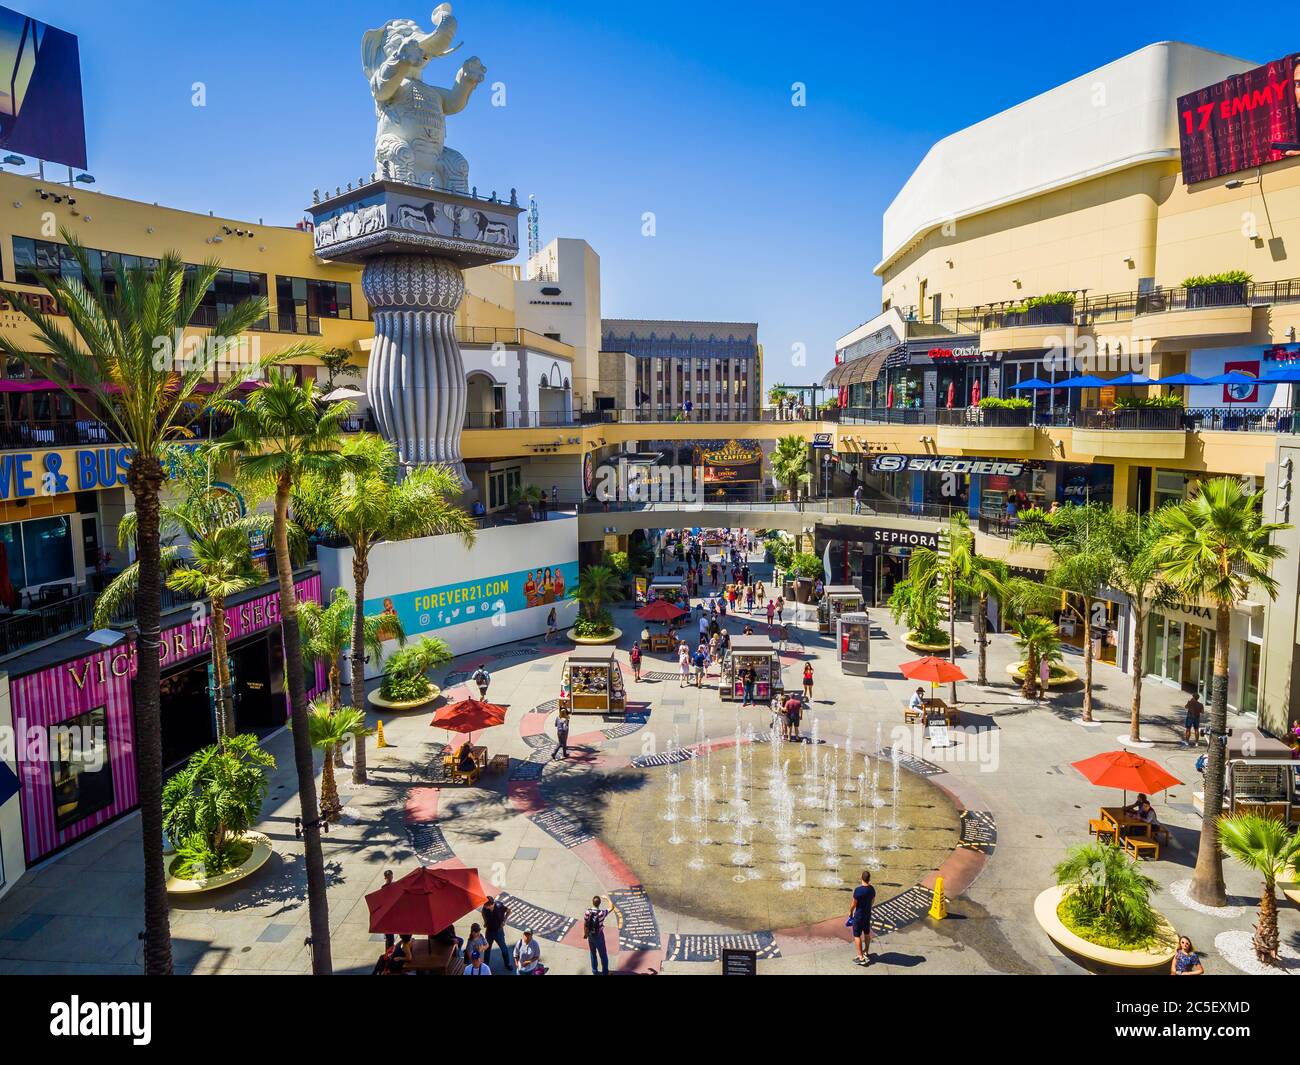 Trip to the Mall: FLASHBACK: Old Pictures of the Beverly Center